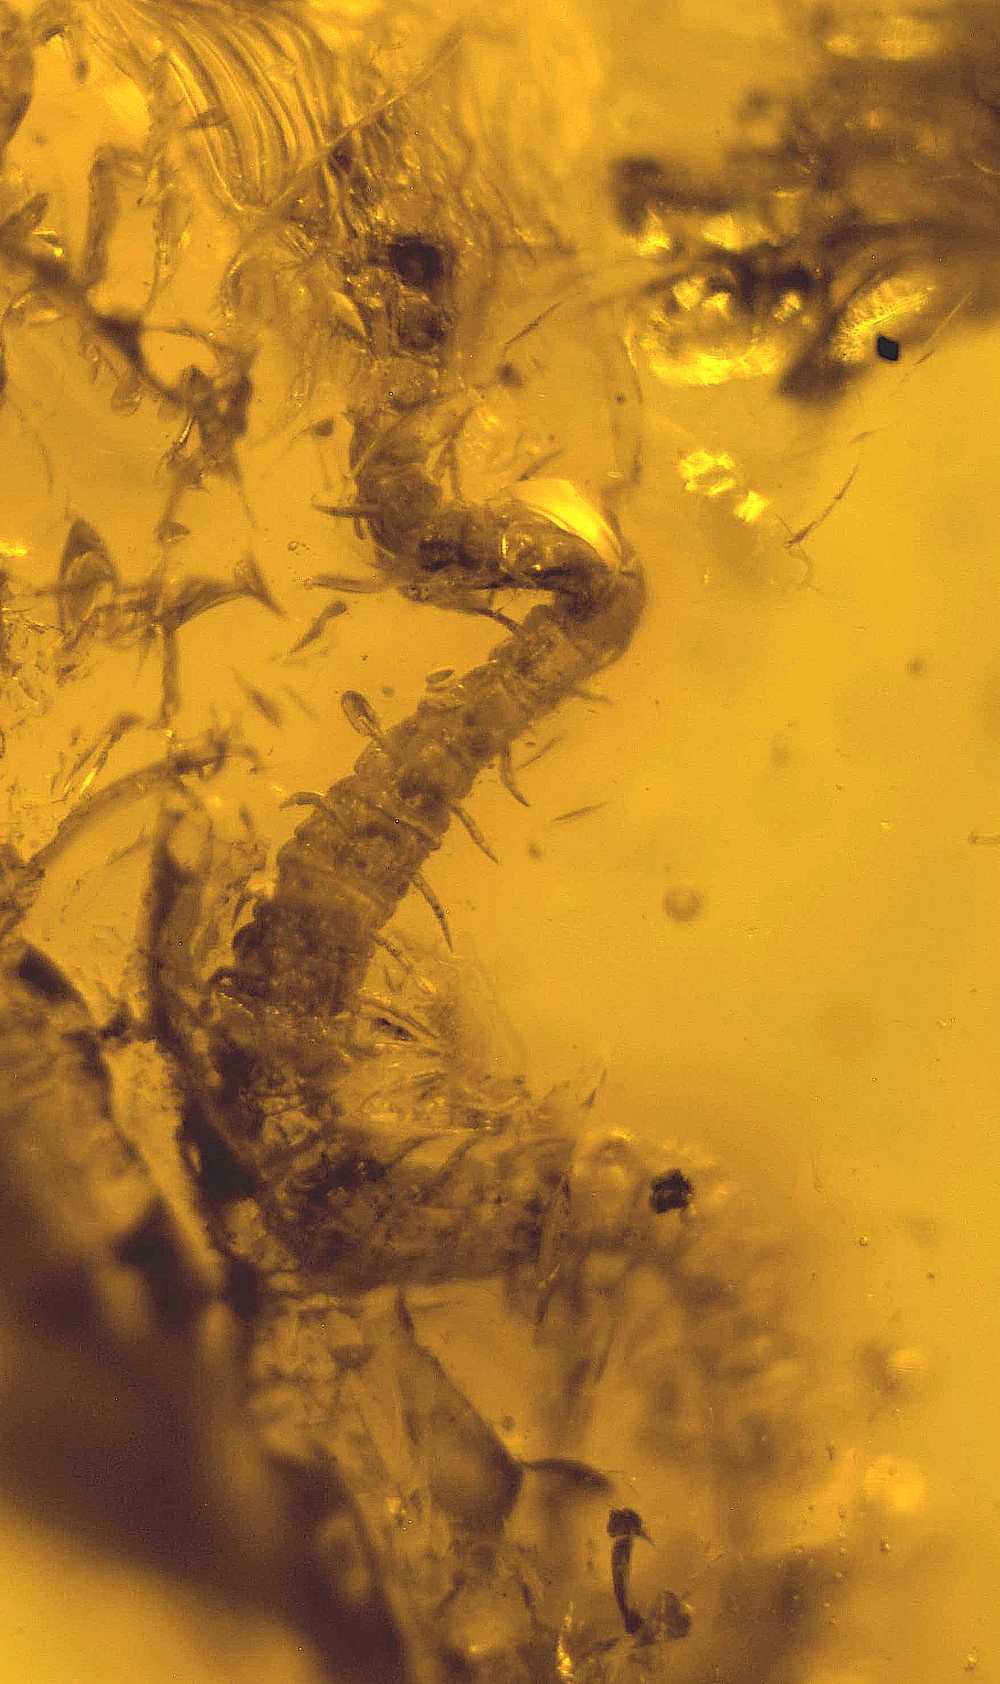 Diplopoda fossil in Baltic amber